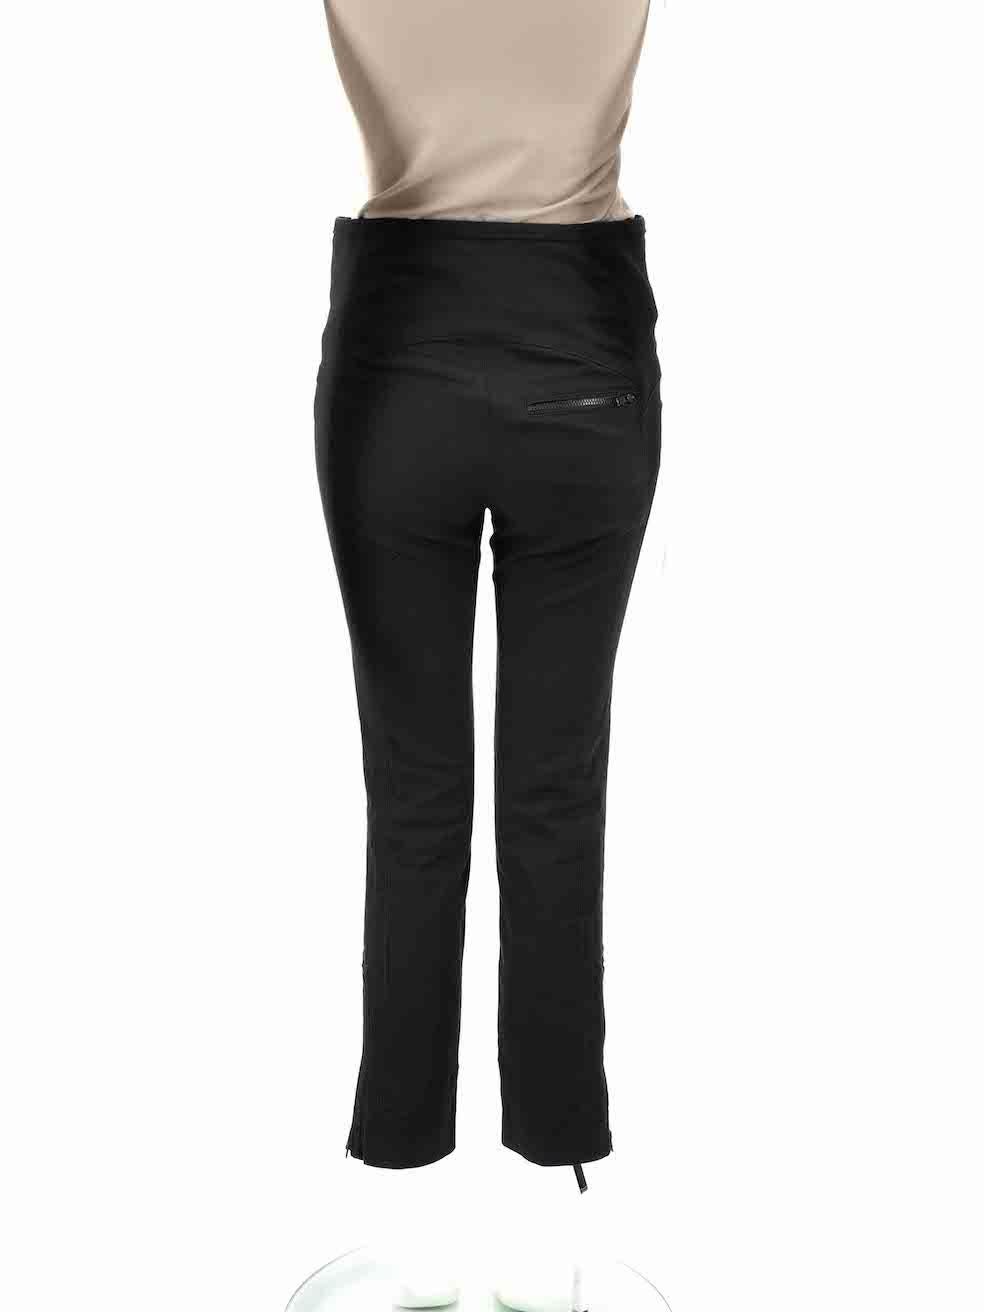 Isabel Marant Black Zipper Detailed High Rise Trousers Size S In Good Condition For Sale In London, GB